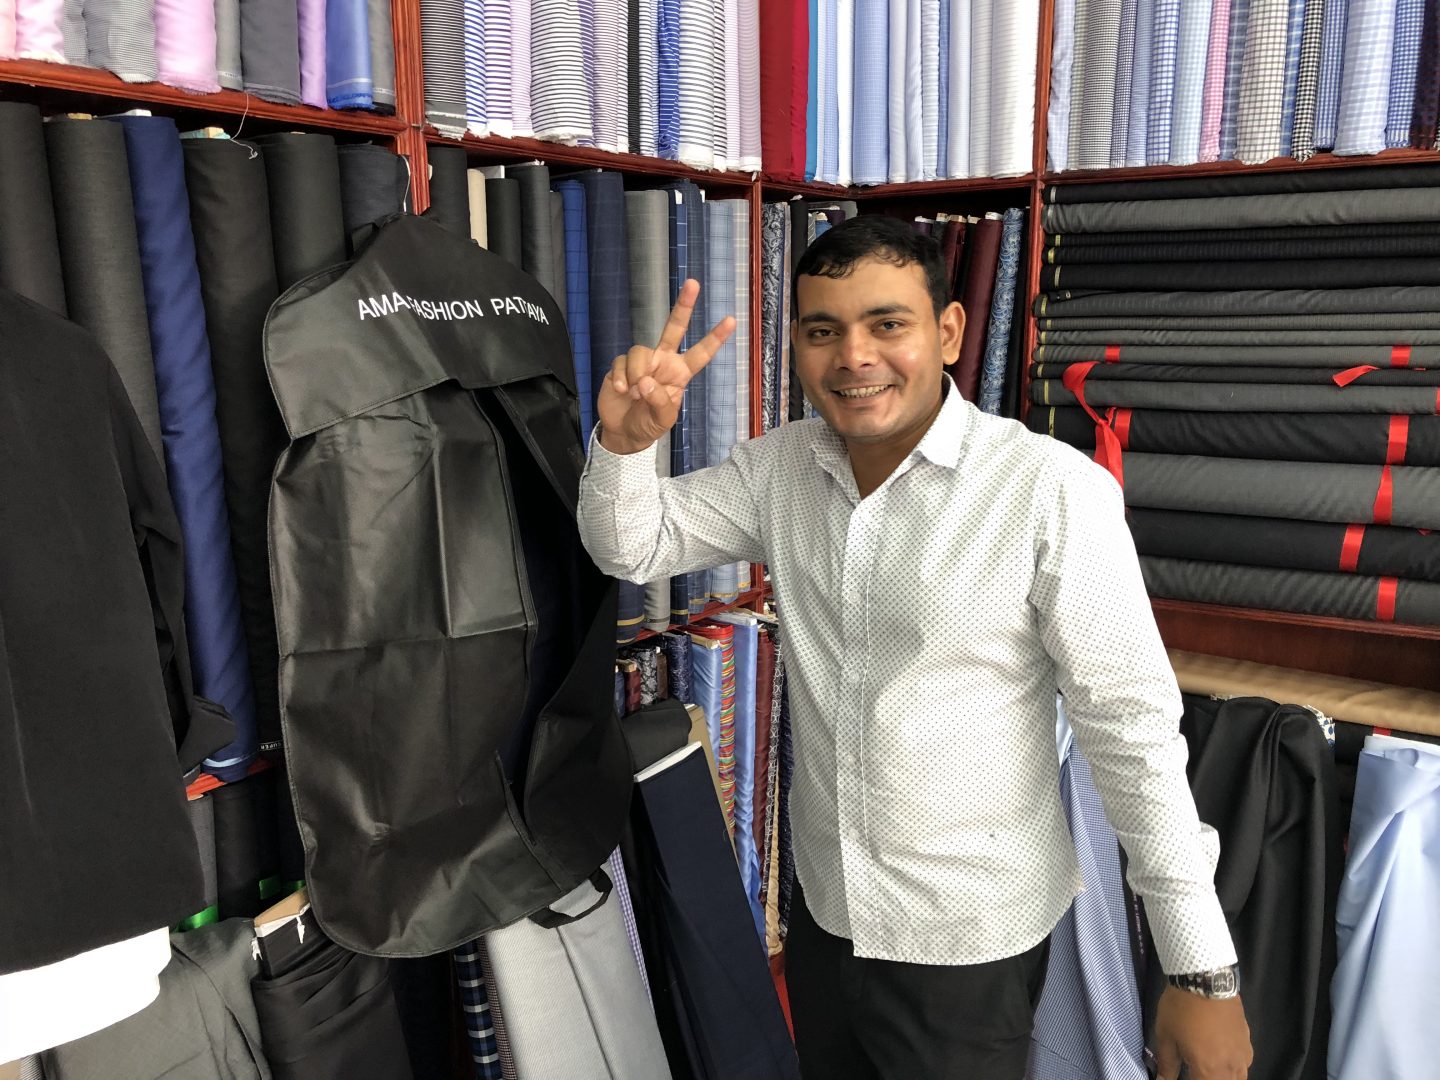 Best Tailor in Thailand - AMA Fashion Pattaya - Suits for Men